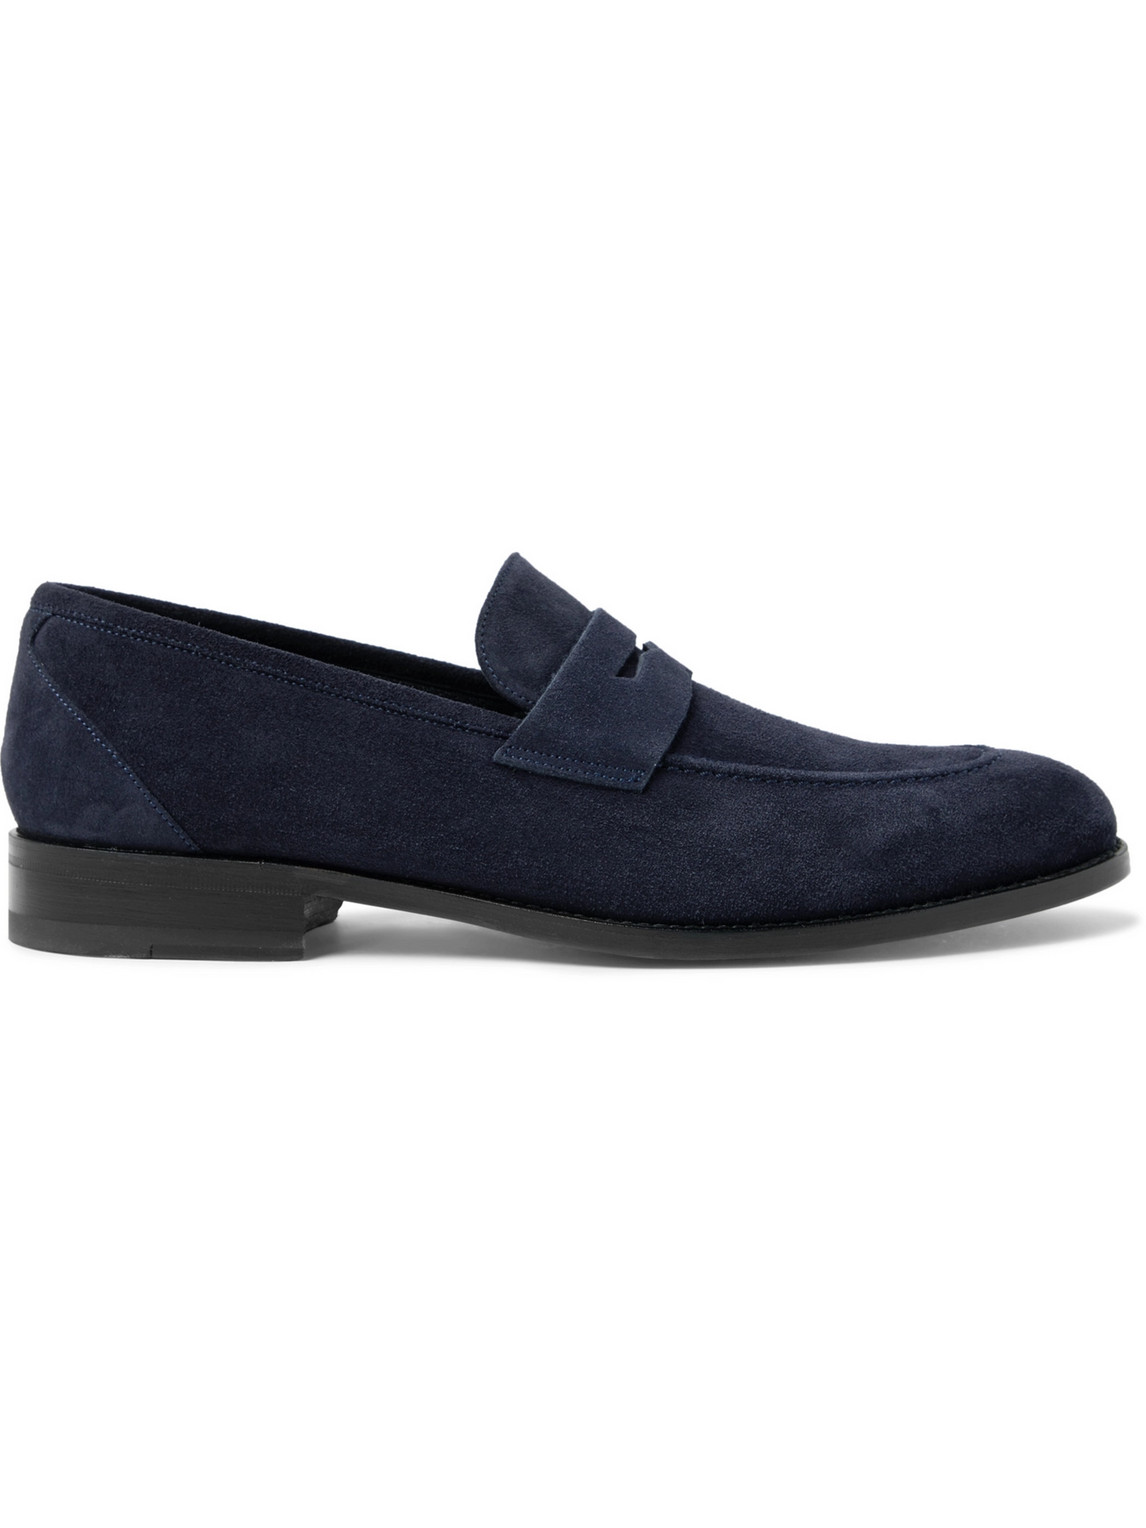 George Suede Penny Loafers